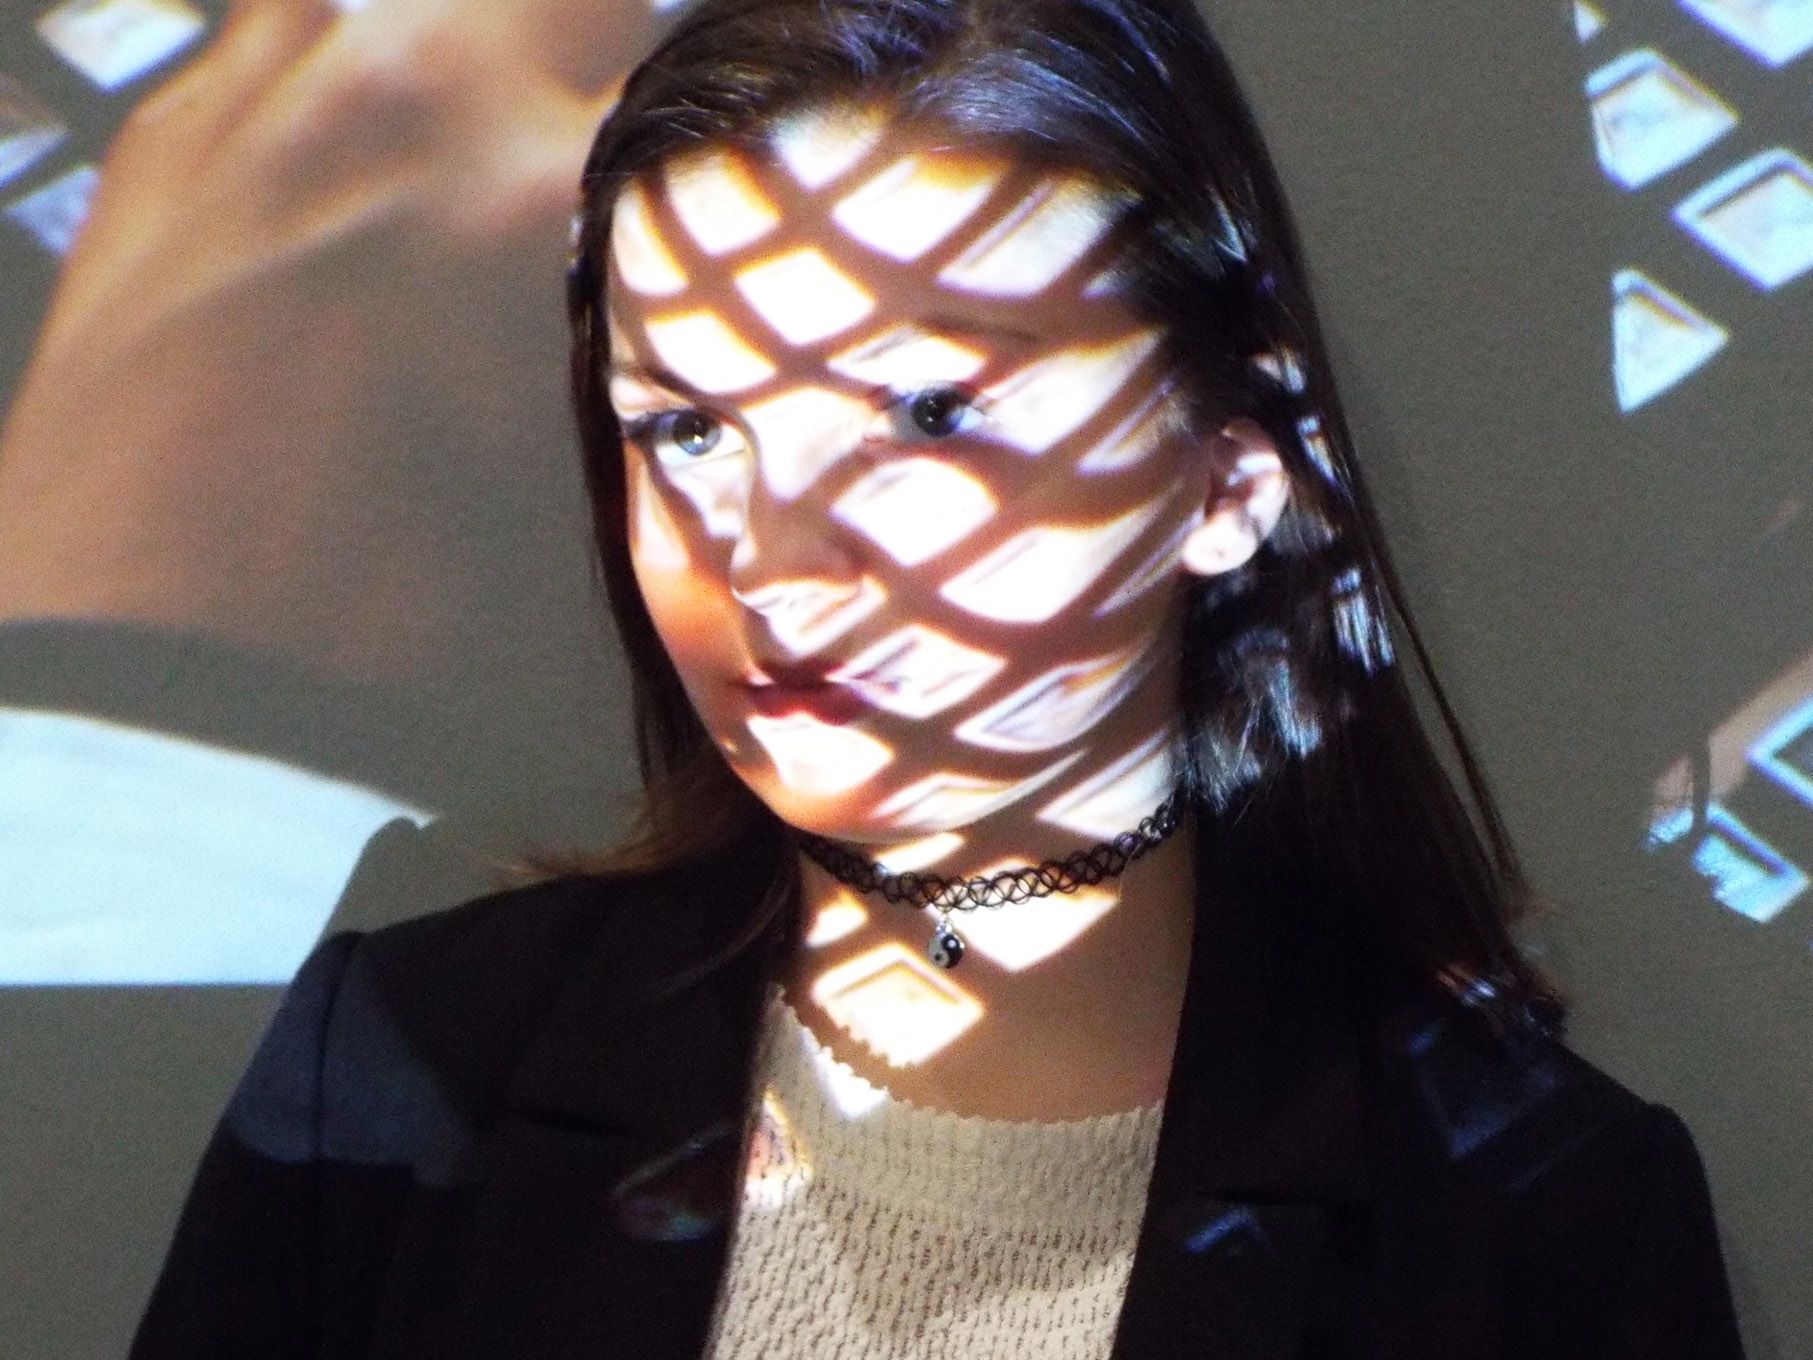 a portrait of a person in front of a projector, projecting a grid pattern onto their face